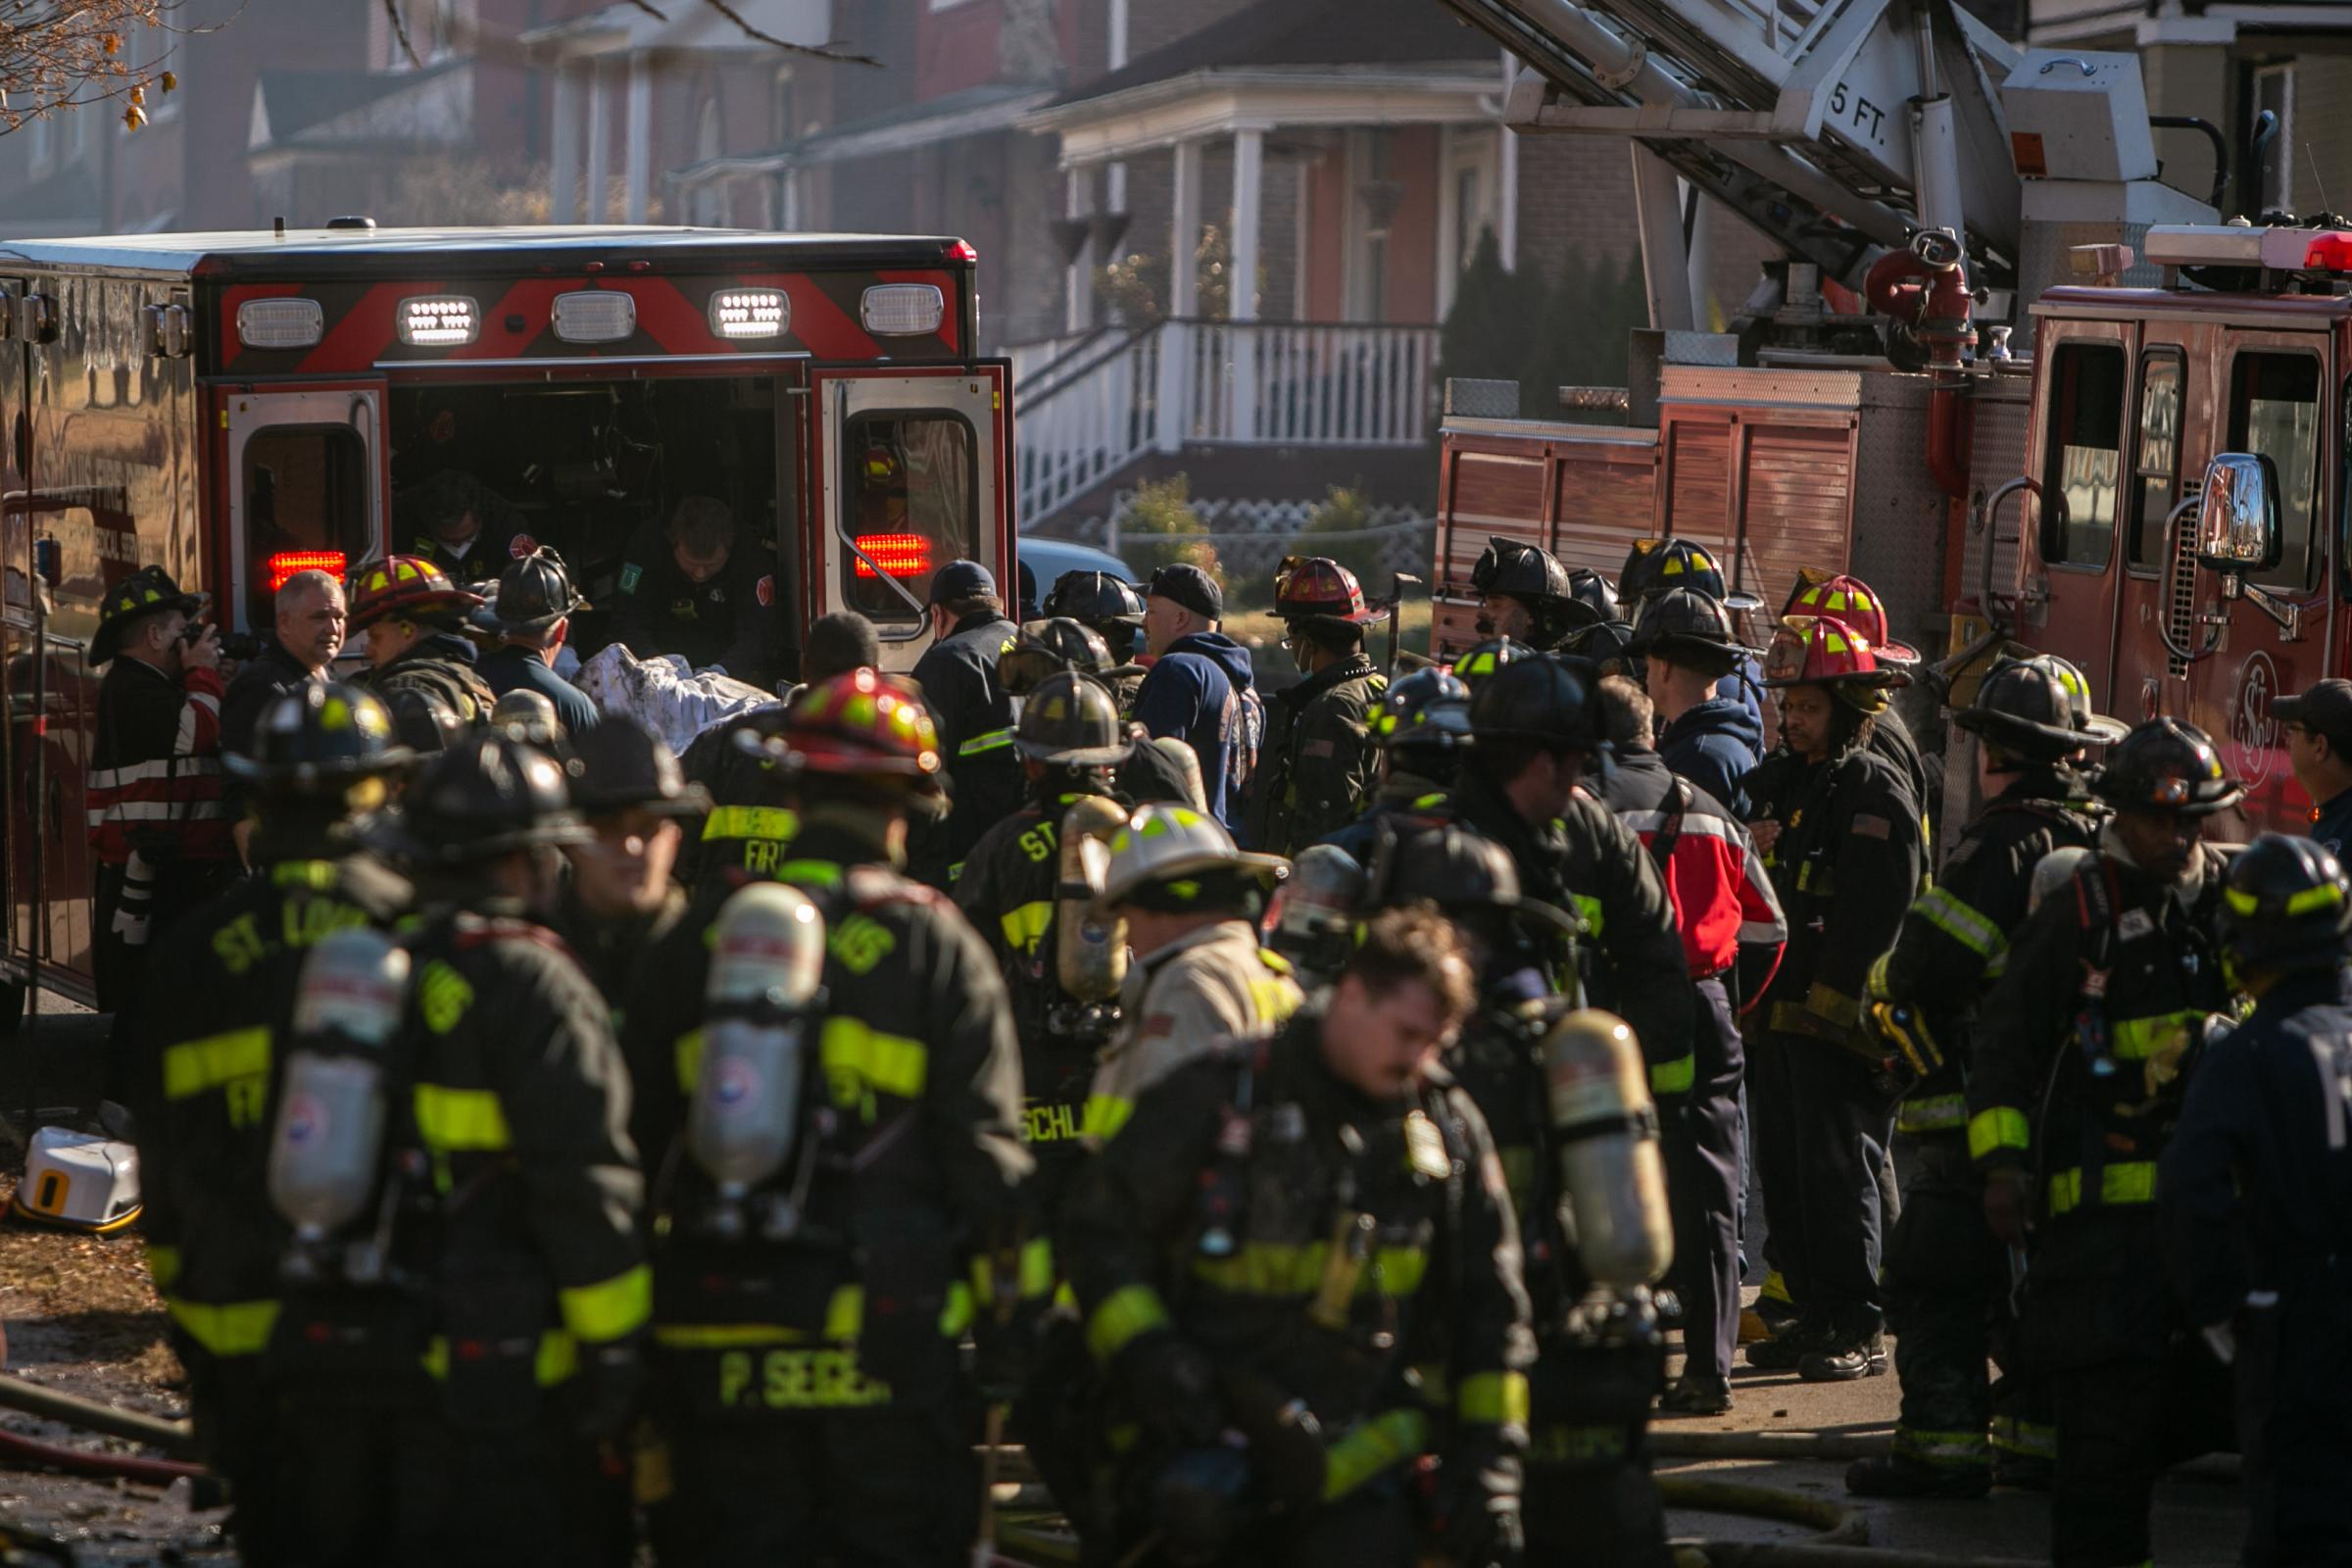 End of Watch - St. Louis firefighters gather in front of the scene of a...